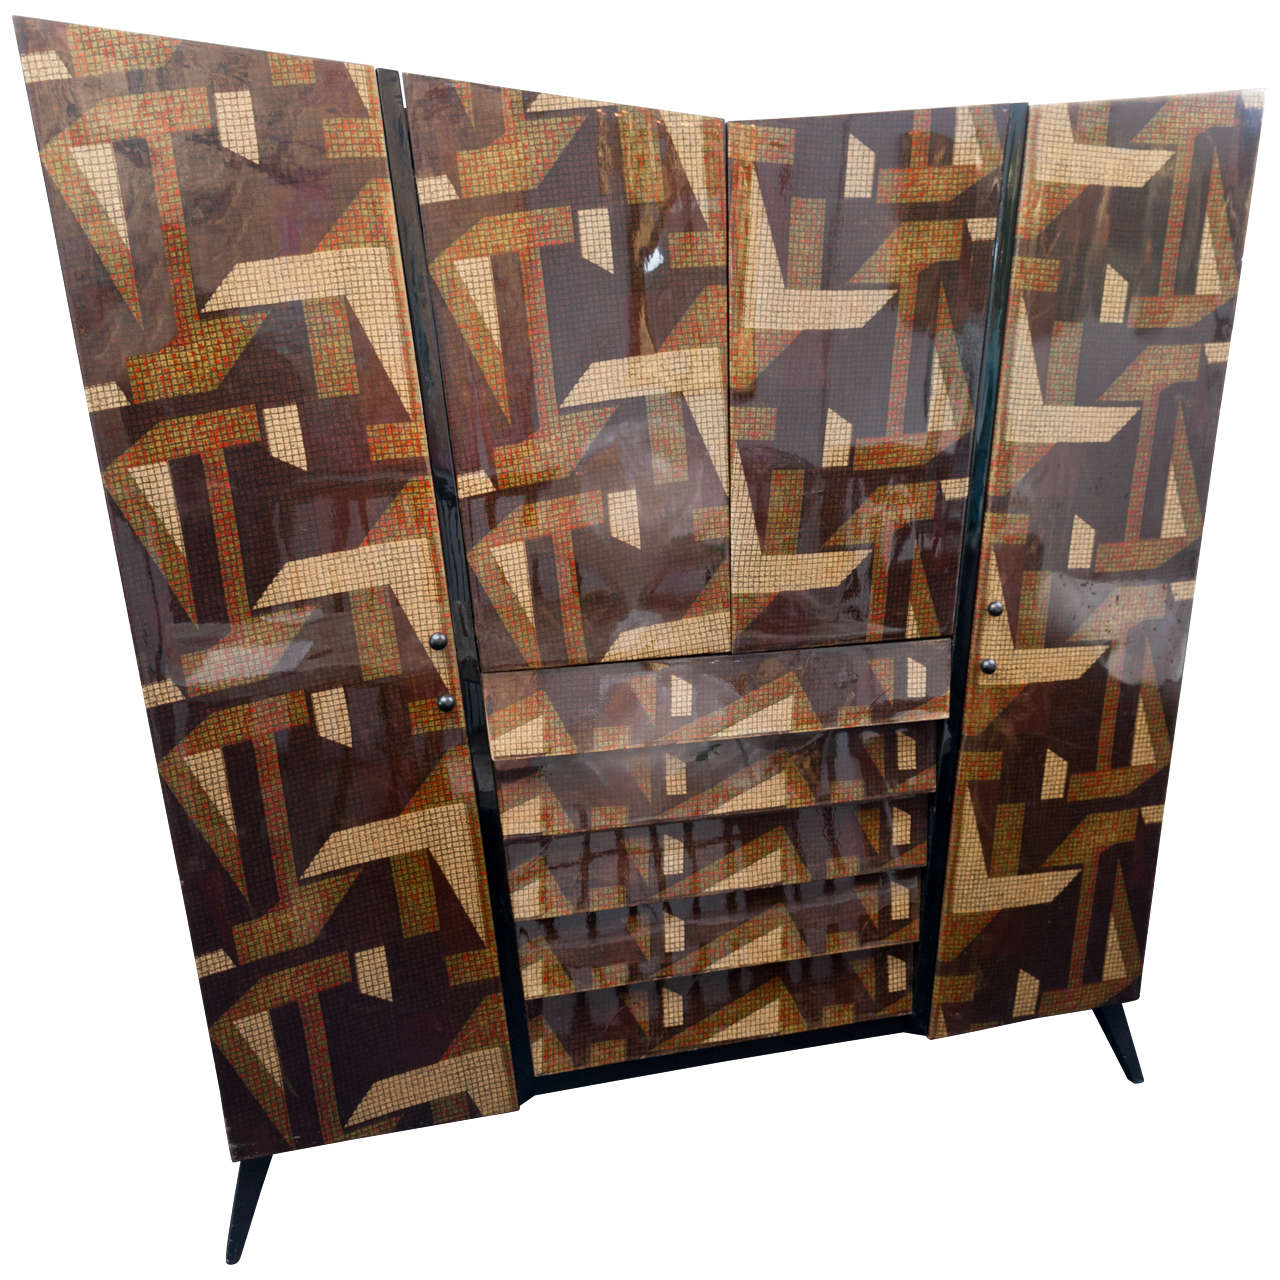 Rare Printed Linen High Gloss Lacquer Cabinet